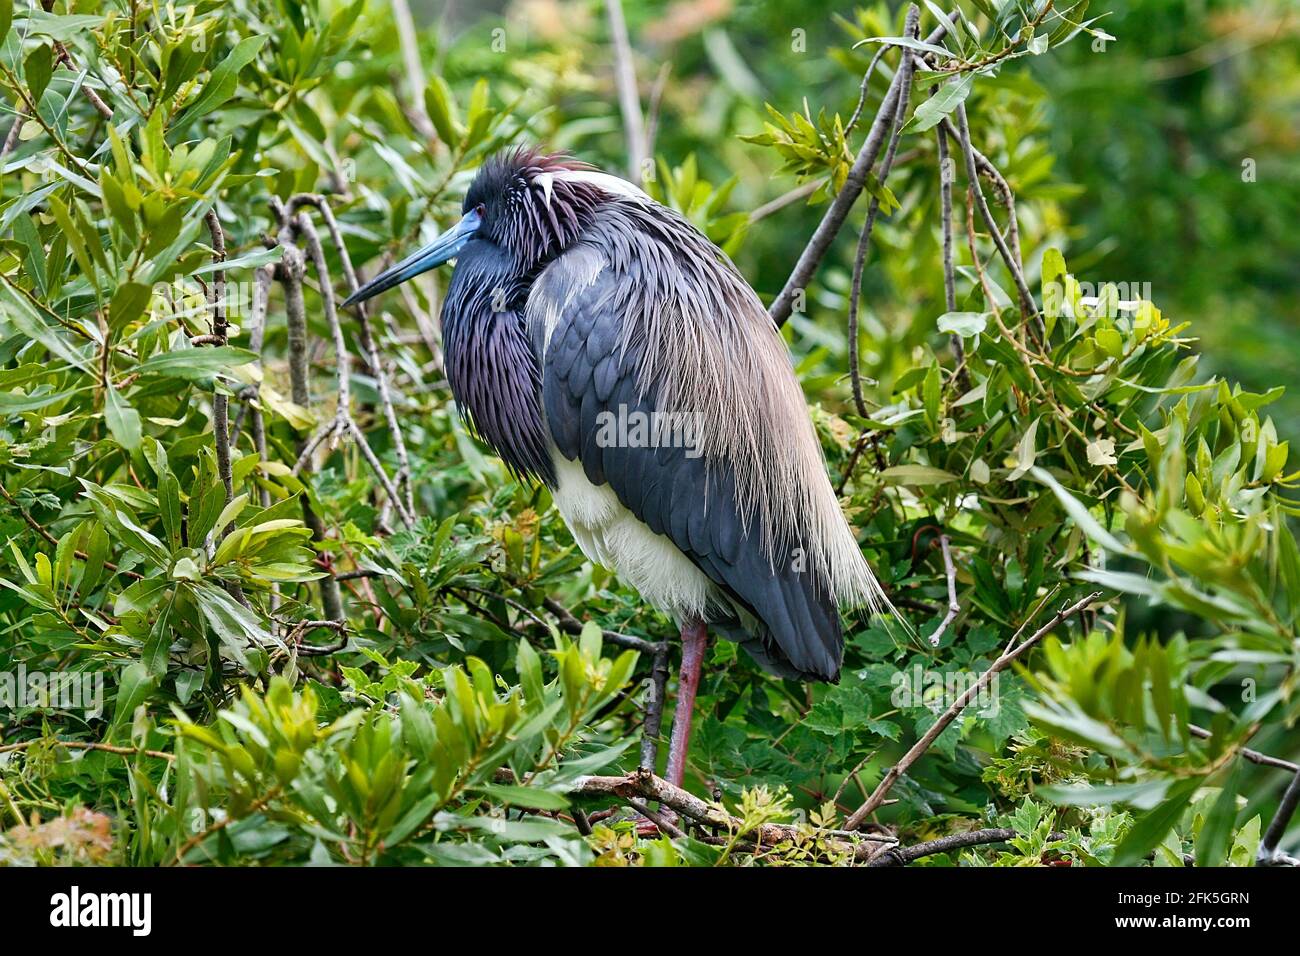 Tricolored Heron with full plumage resting in near nest in a bird sanctuary in Northern Florida Stock Photo